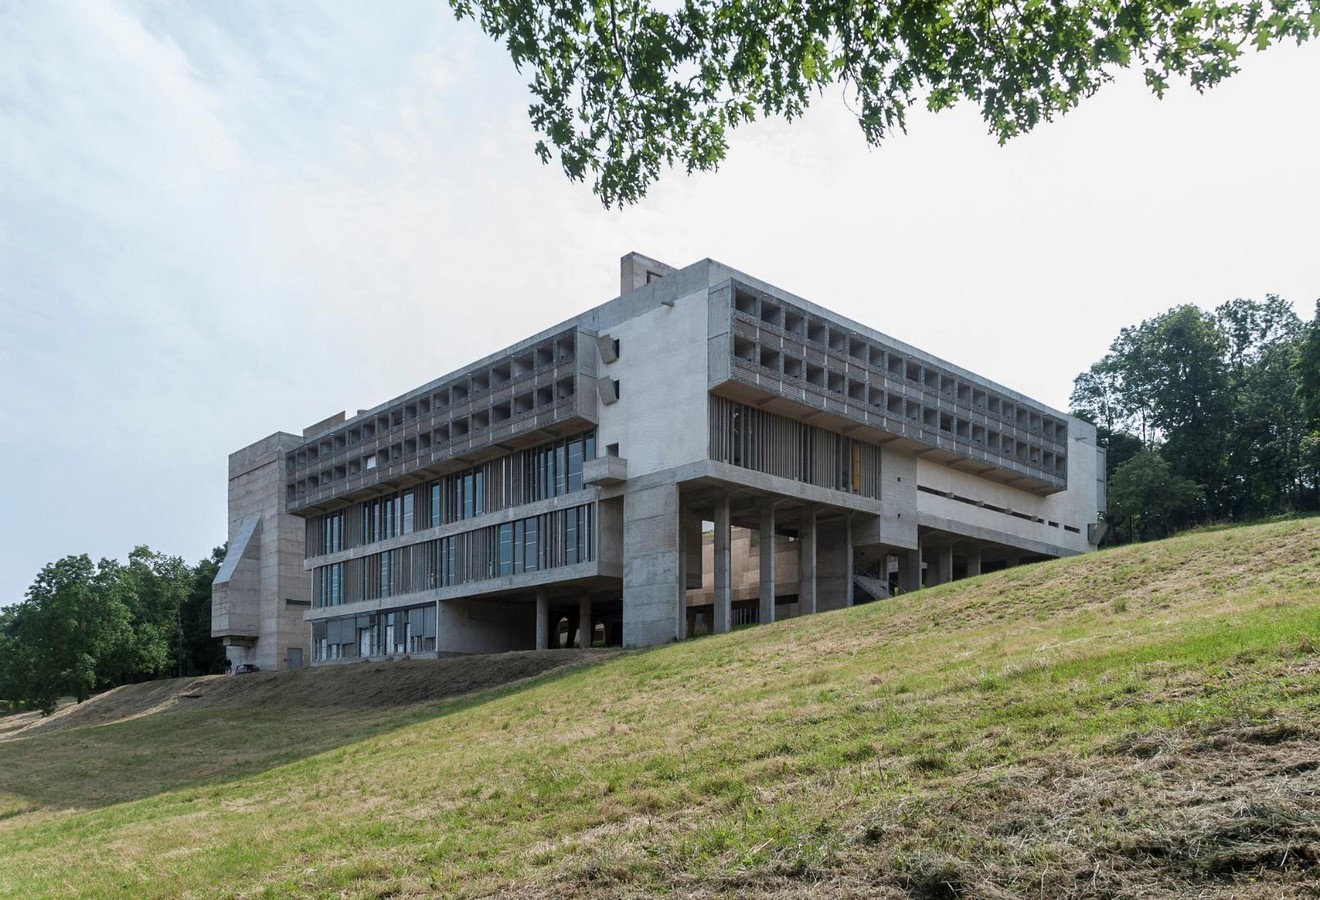 Le Corbusier: The Modernist Architect who Redefined the Built Environment - Sheet4